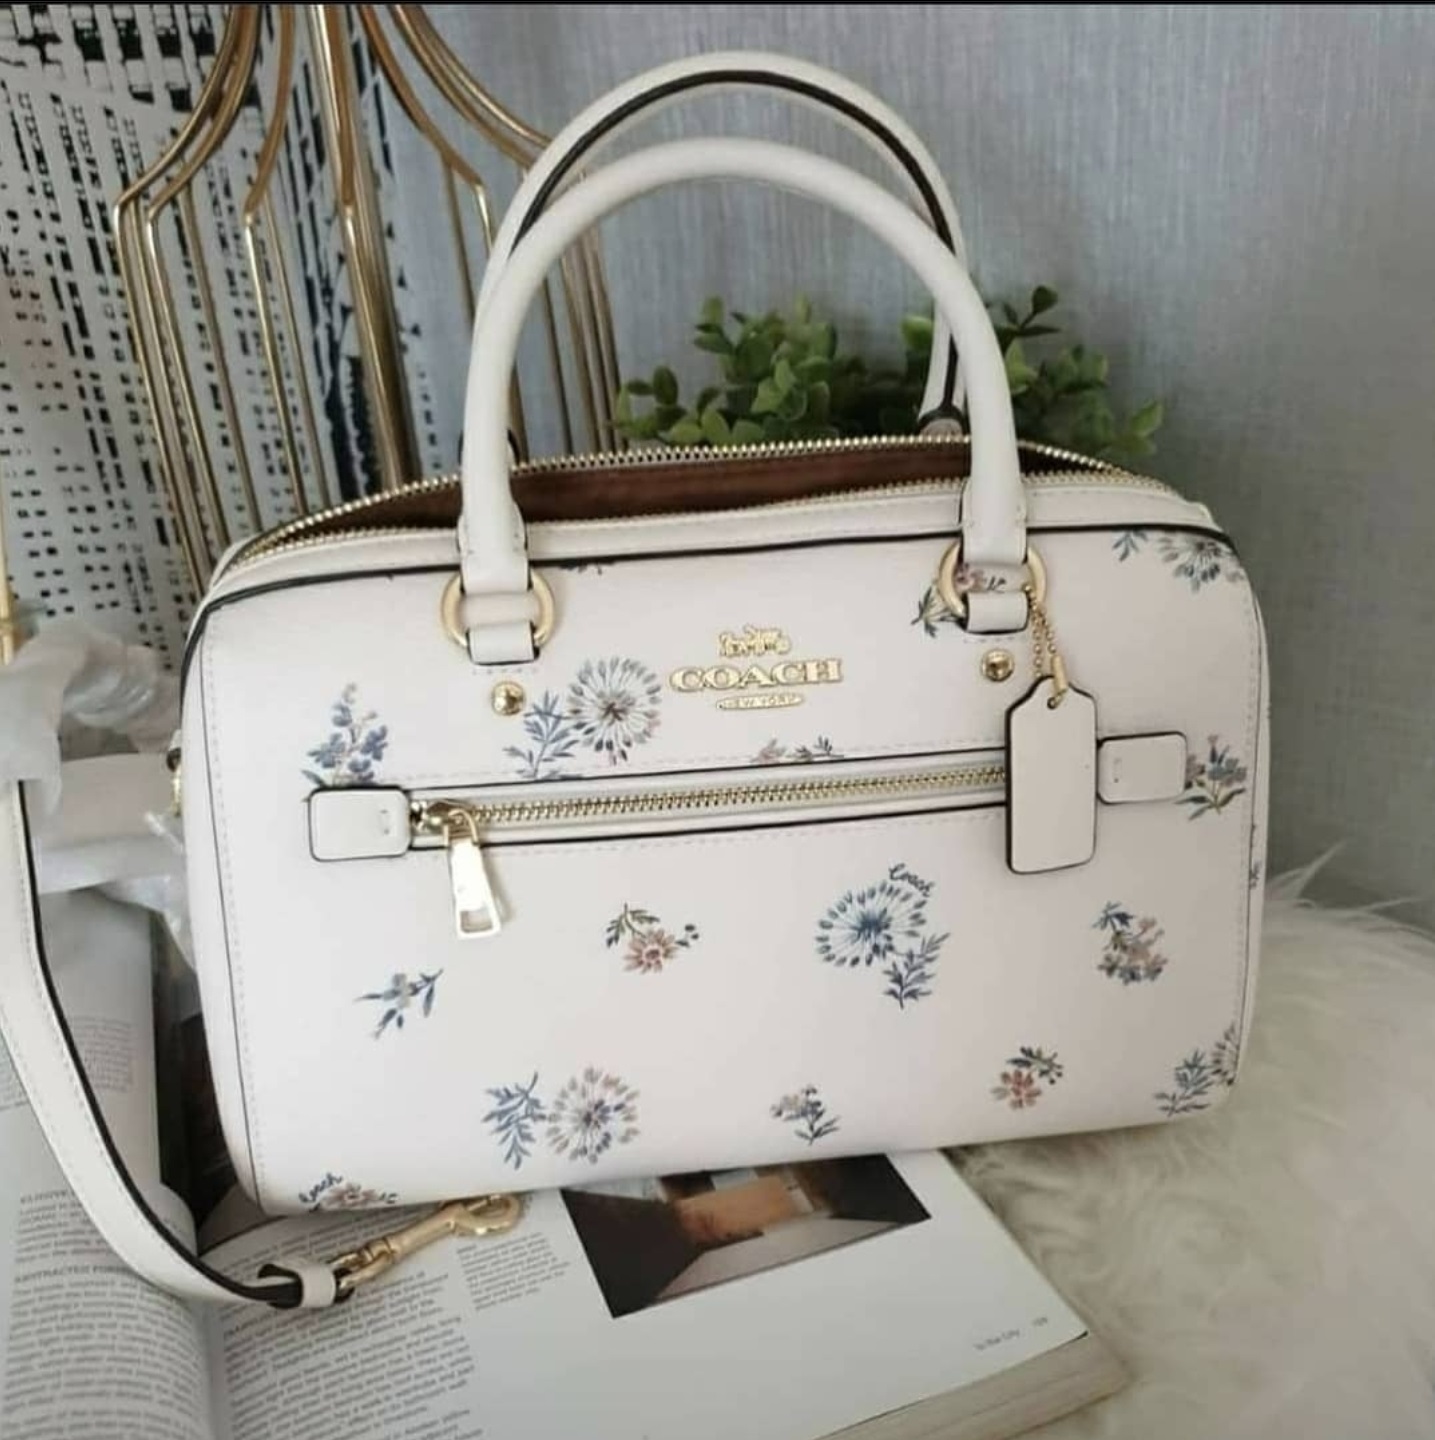 Coach 1941 Floral Bag on SALE - Shopping and Info